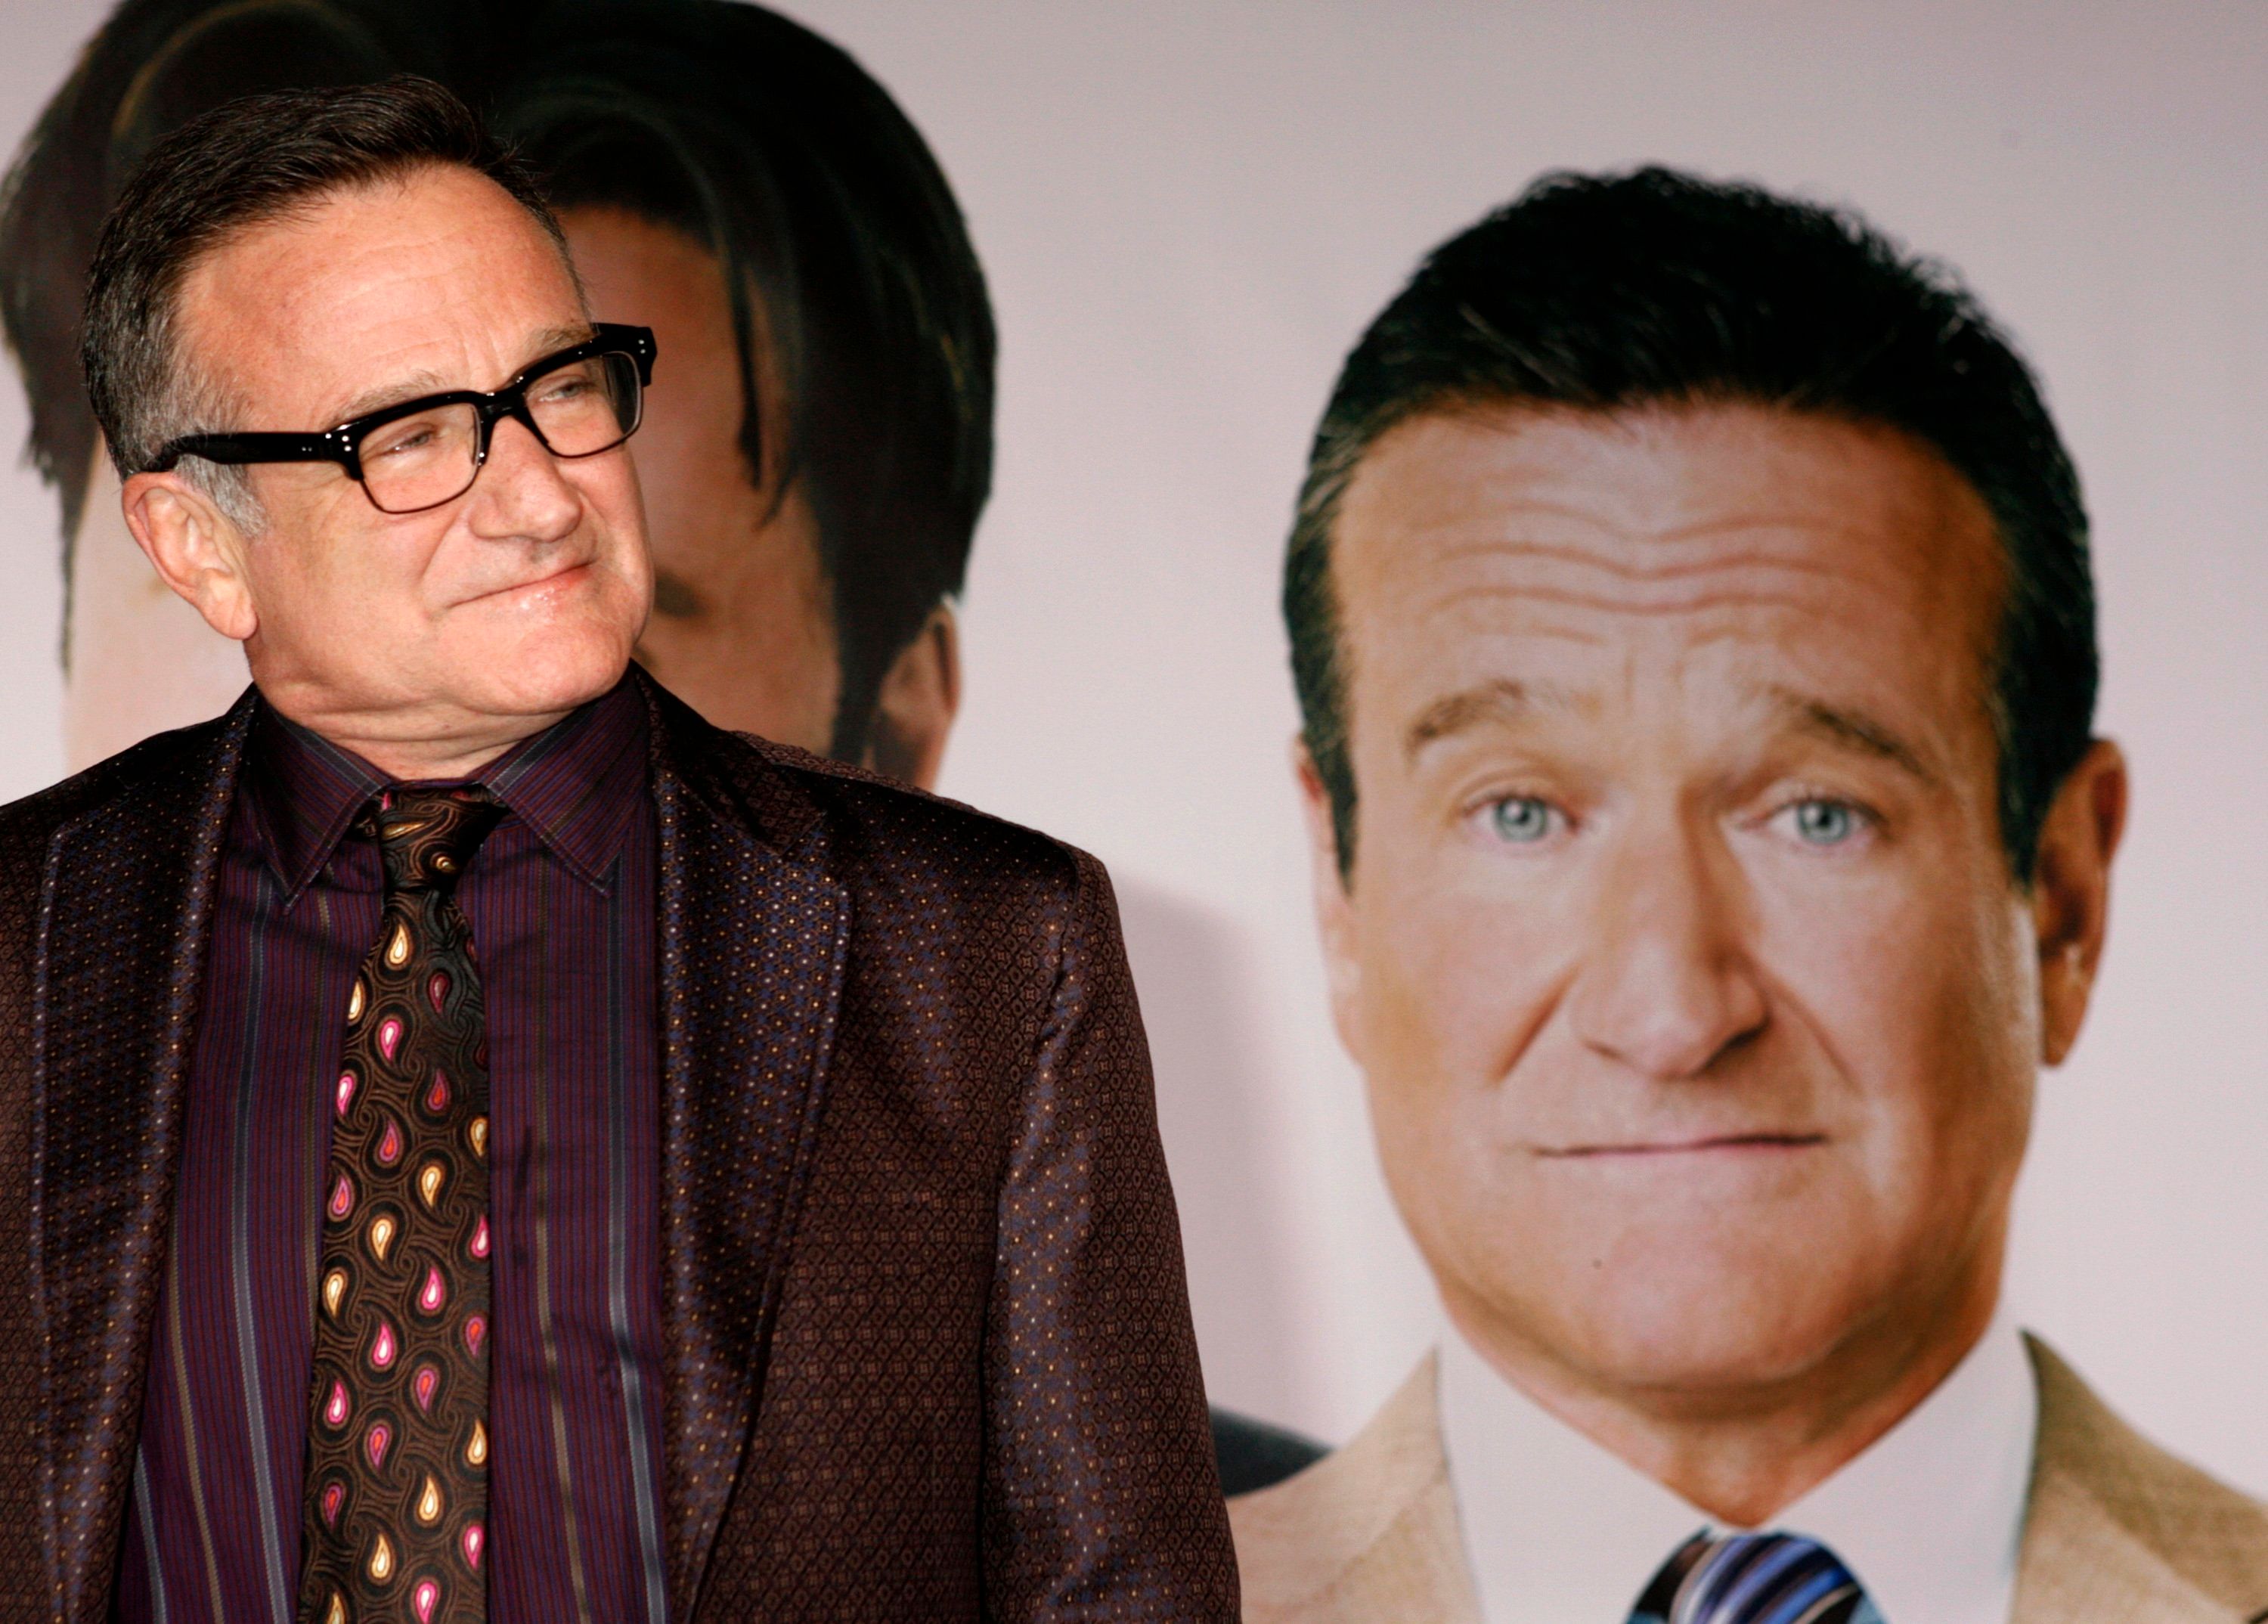 Actor Robin Williams, star of the new film "Old Dogs" arrives at the film's premiere in Hollywood, California in this November 9, 2009 Reuters' file photo.